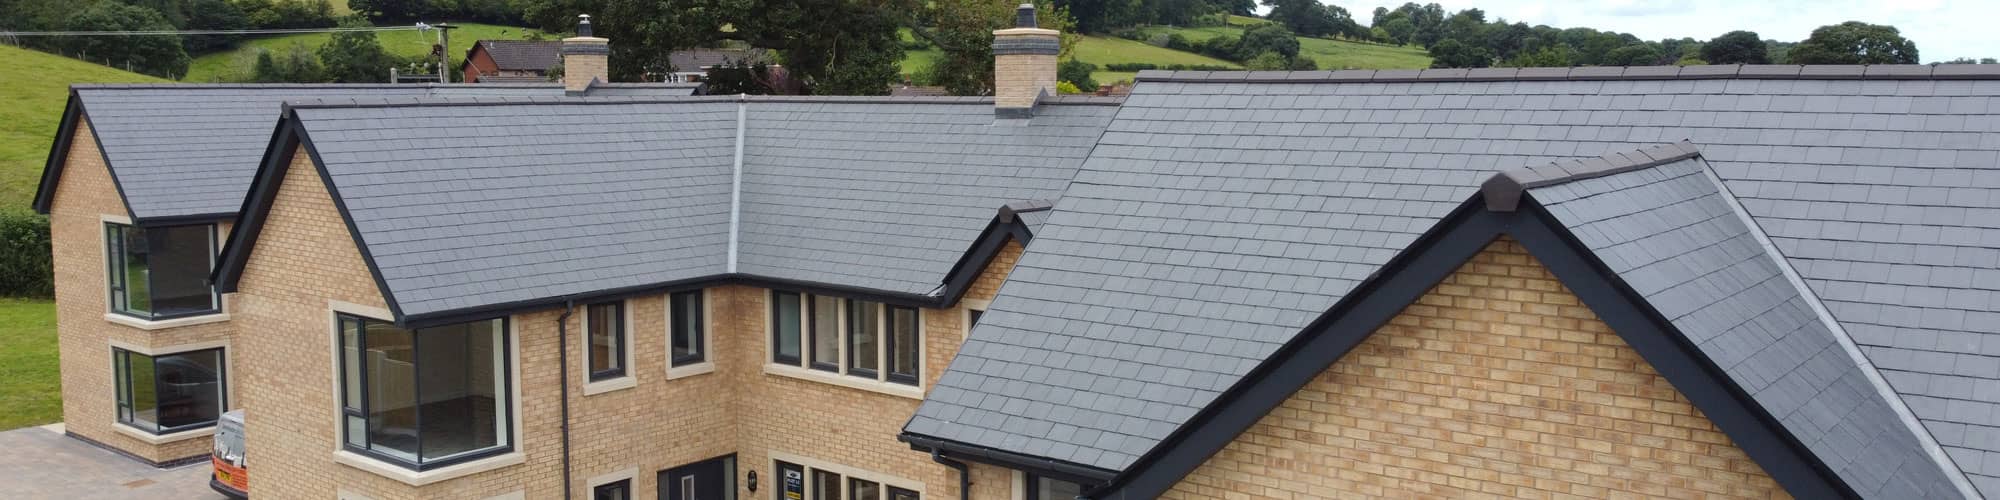 New slate roof on apartment block in Ruthin, North Wales